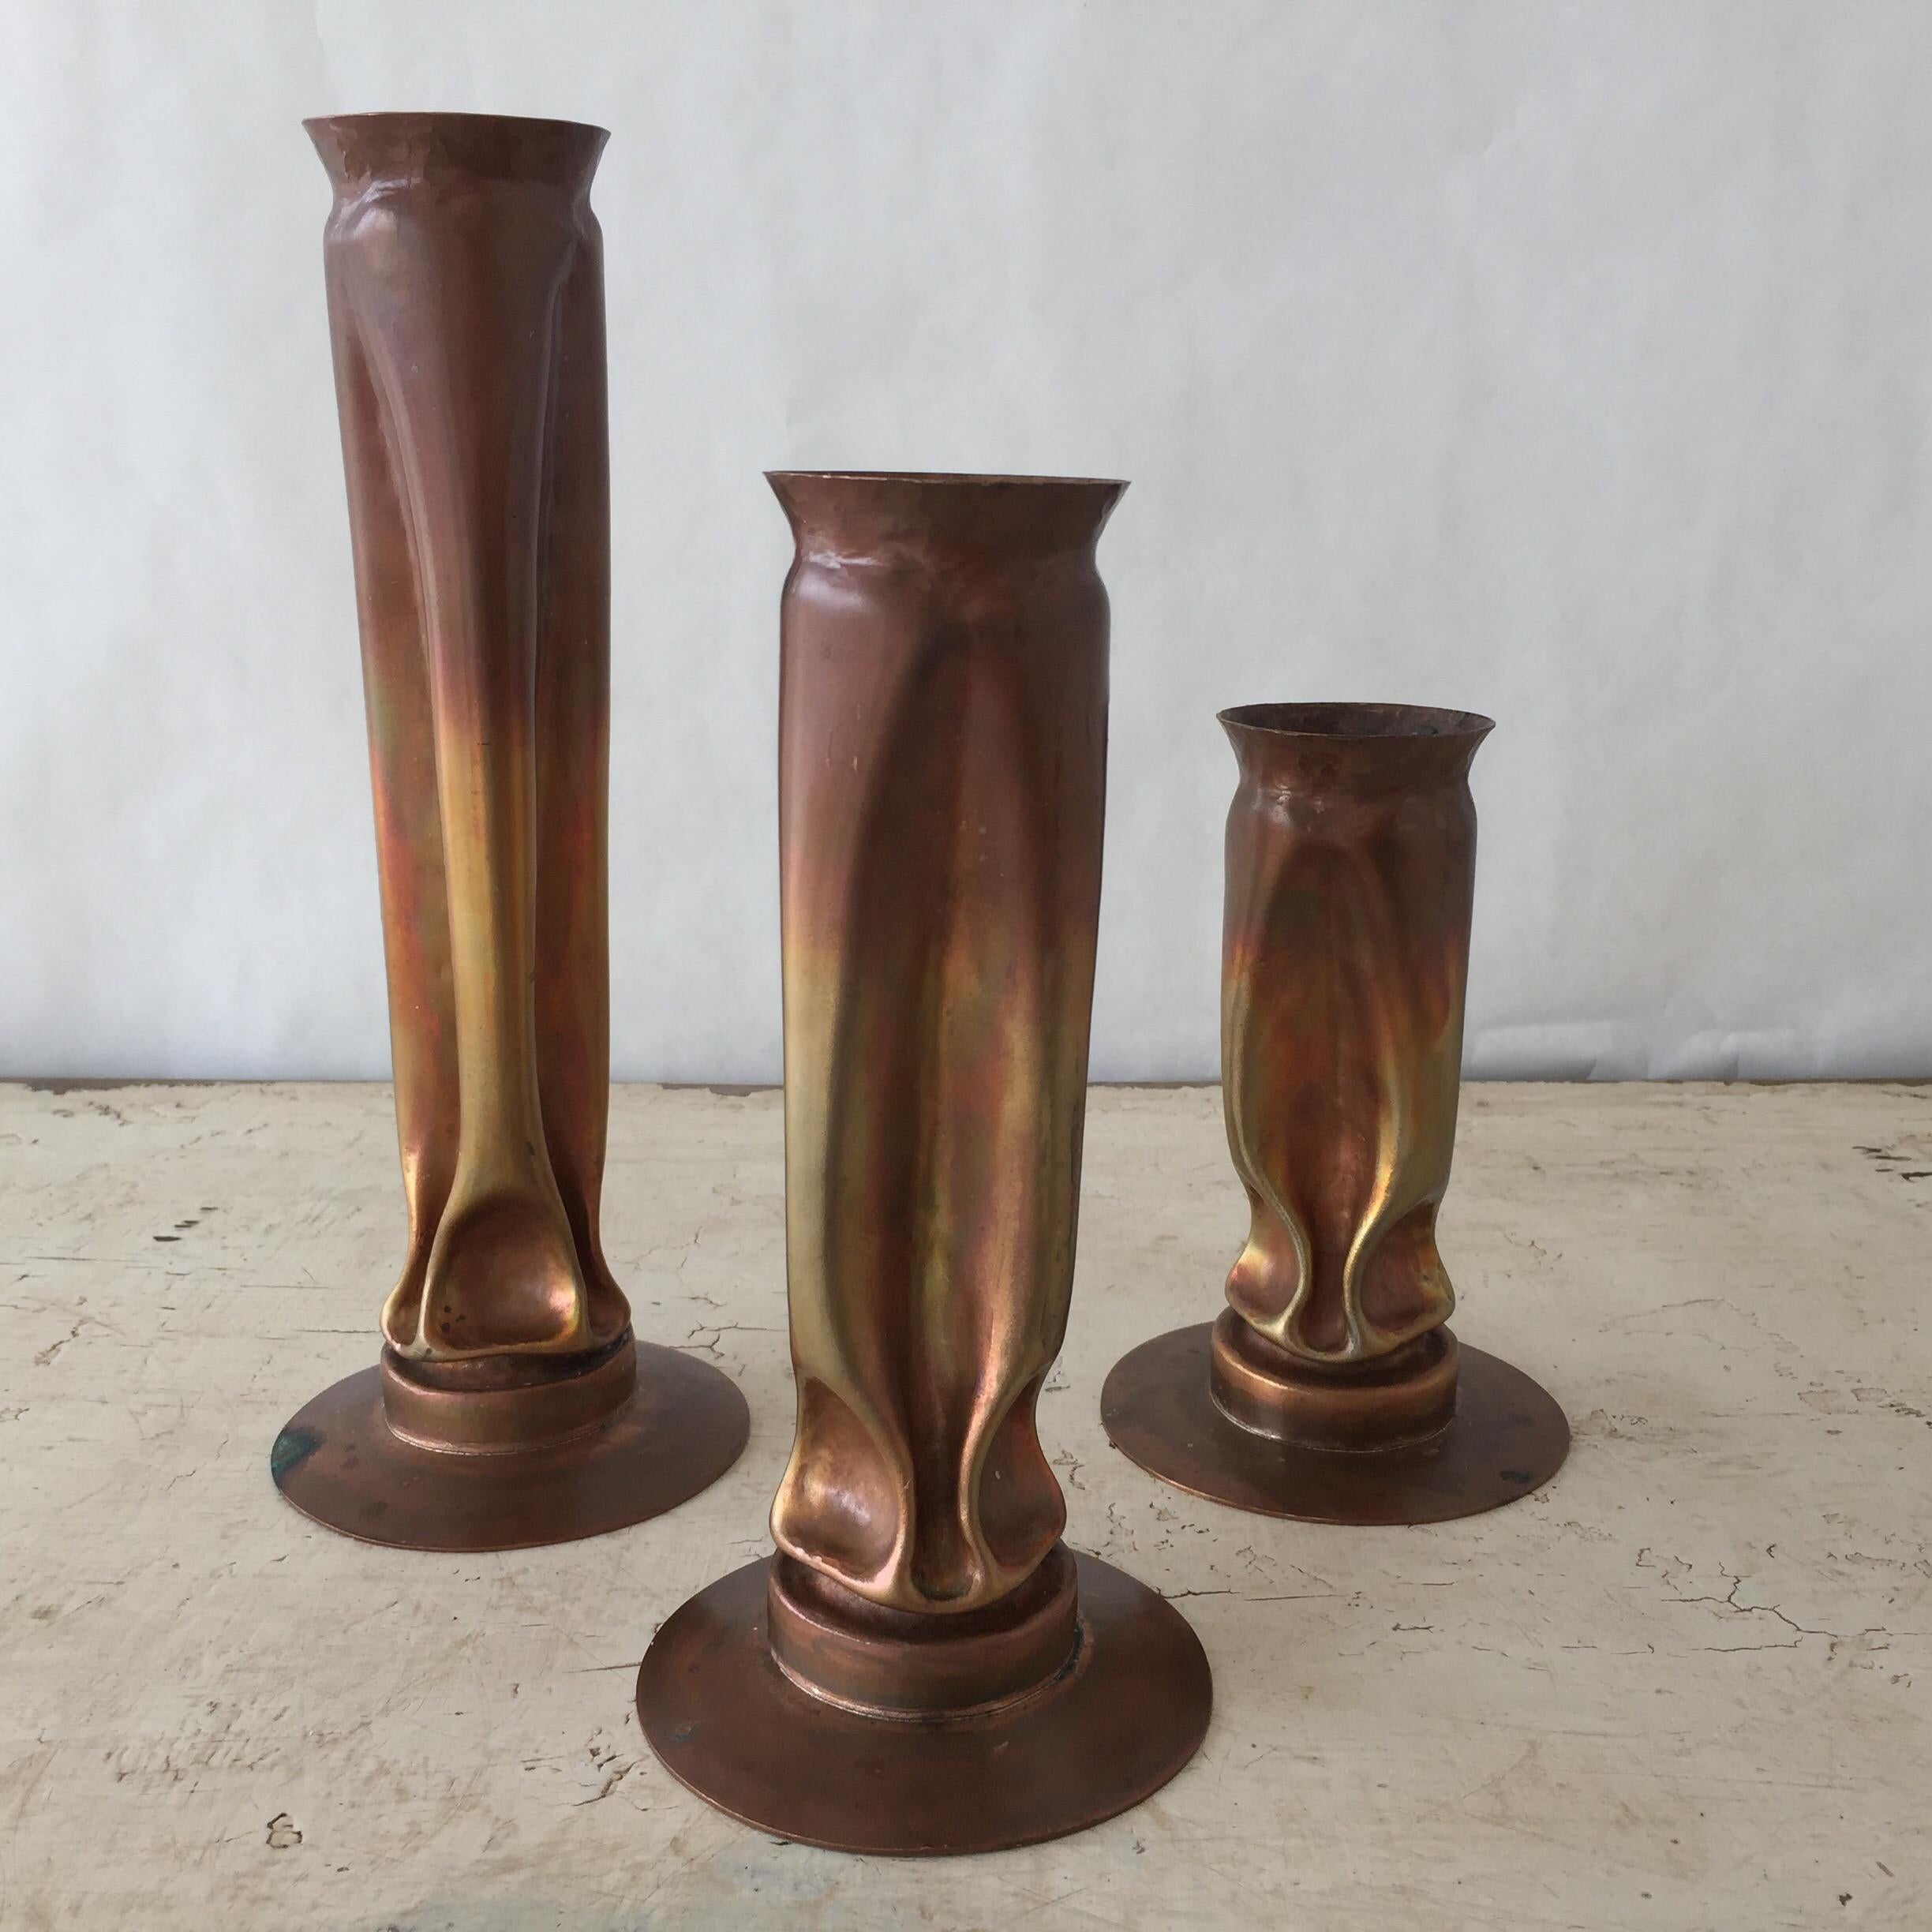 Pair of large 1970s Brutalist copper candleholders by master sculptor Thomas Roy Markusen. Tall, tortured form of hammered and shaped copper has an organic aesthetic. Pinched and indented elements provide internal support for a pillar candle, while